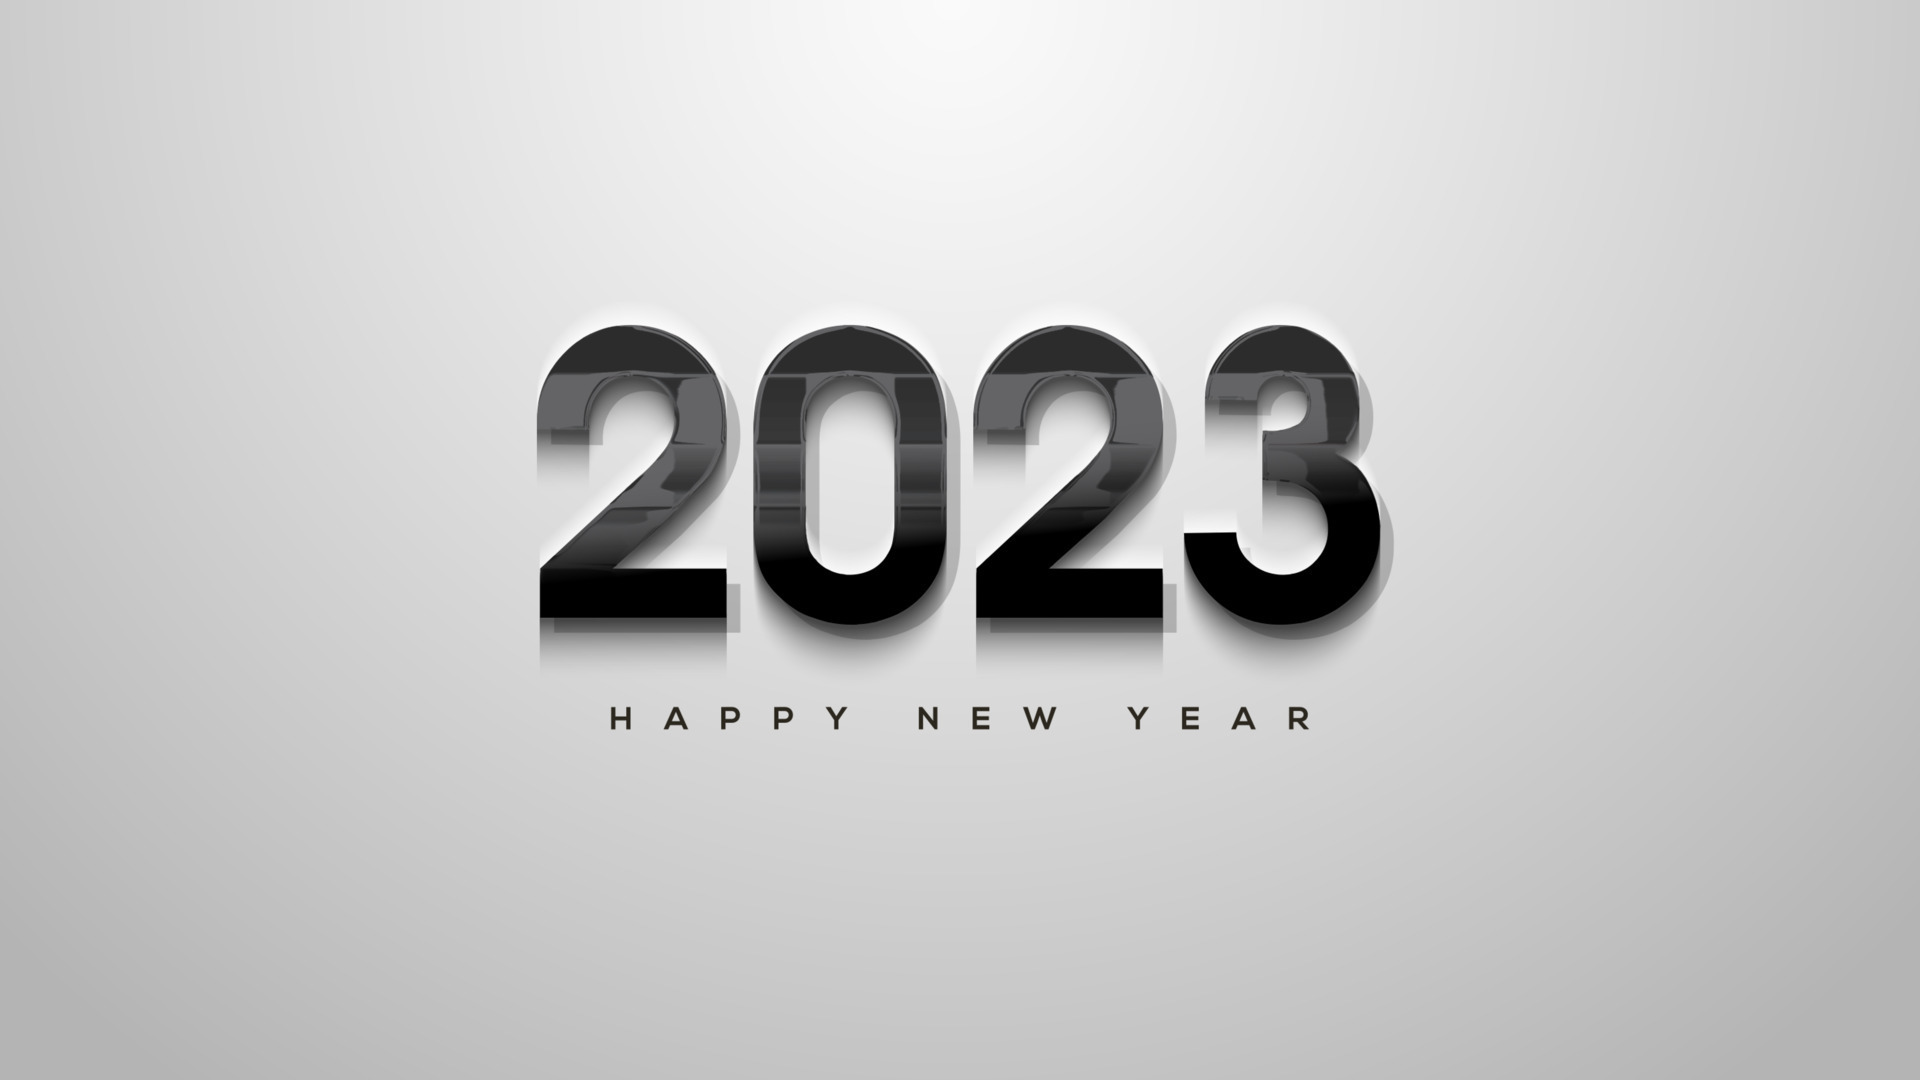 Happy new year 2023 with 3D black numbers on white background